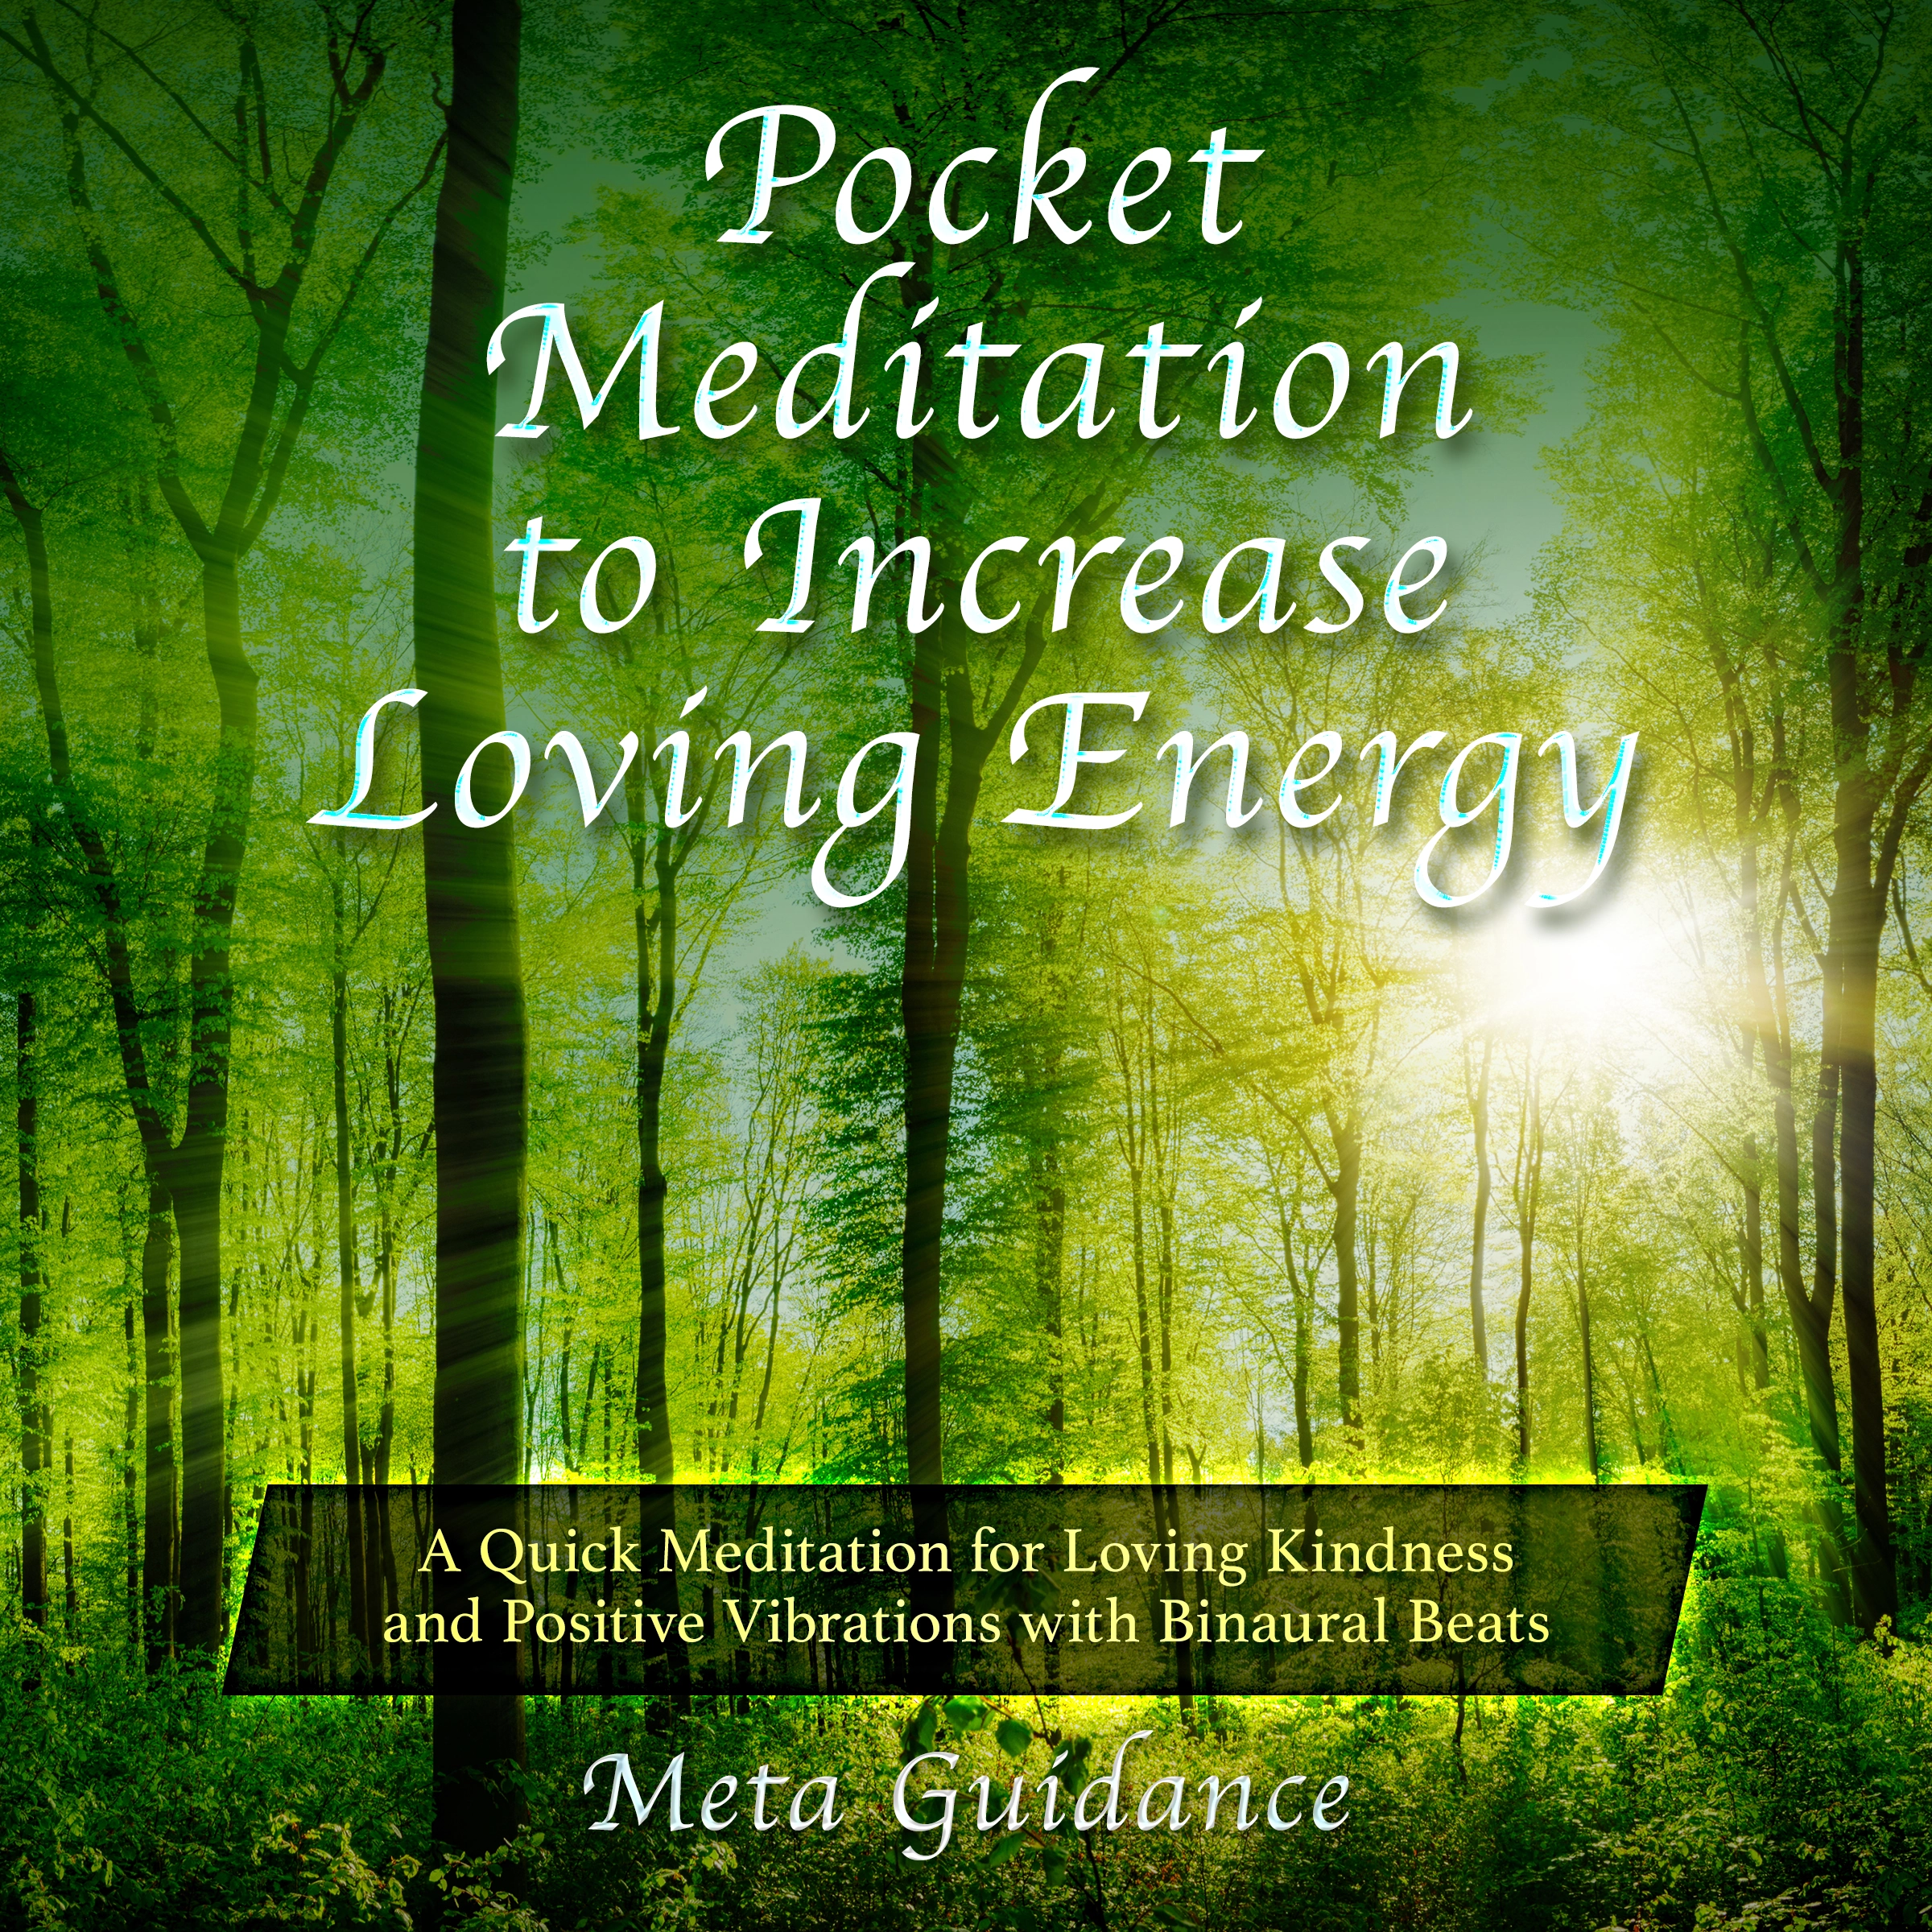 Pocket Meditation to Increase Loving Energy: A Quick Meditation for Loving Kindness and Positive Vibrations with Binaural Beats Audiobook by Meta Guidance